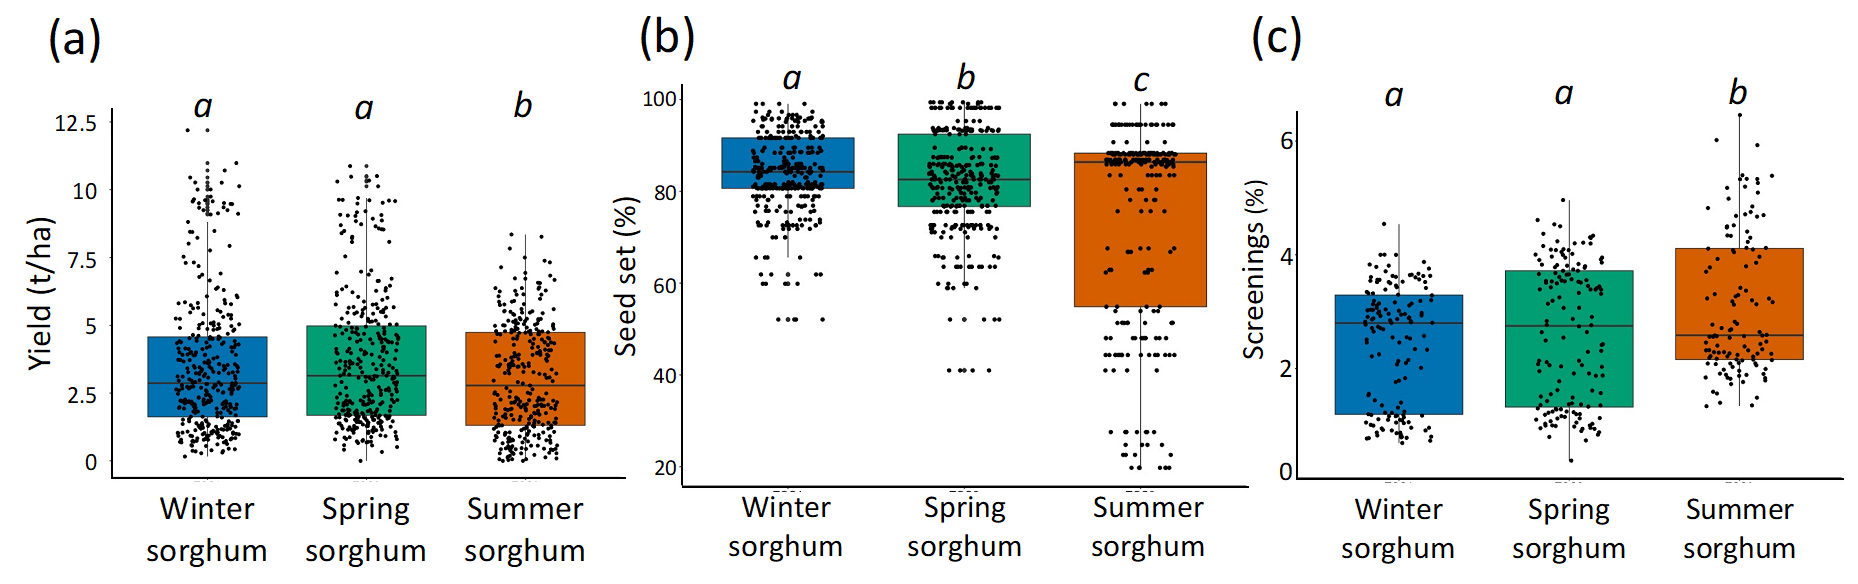 Box and whisker graphs showing outcomes from 15 trials sown across the Liverpool Plains, Northern NSW, Darling Downs, Western Downs, and Central Queensland for the 2018/19 and 2019/20 seasons